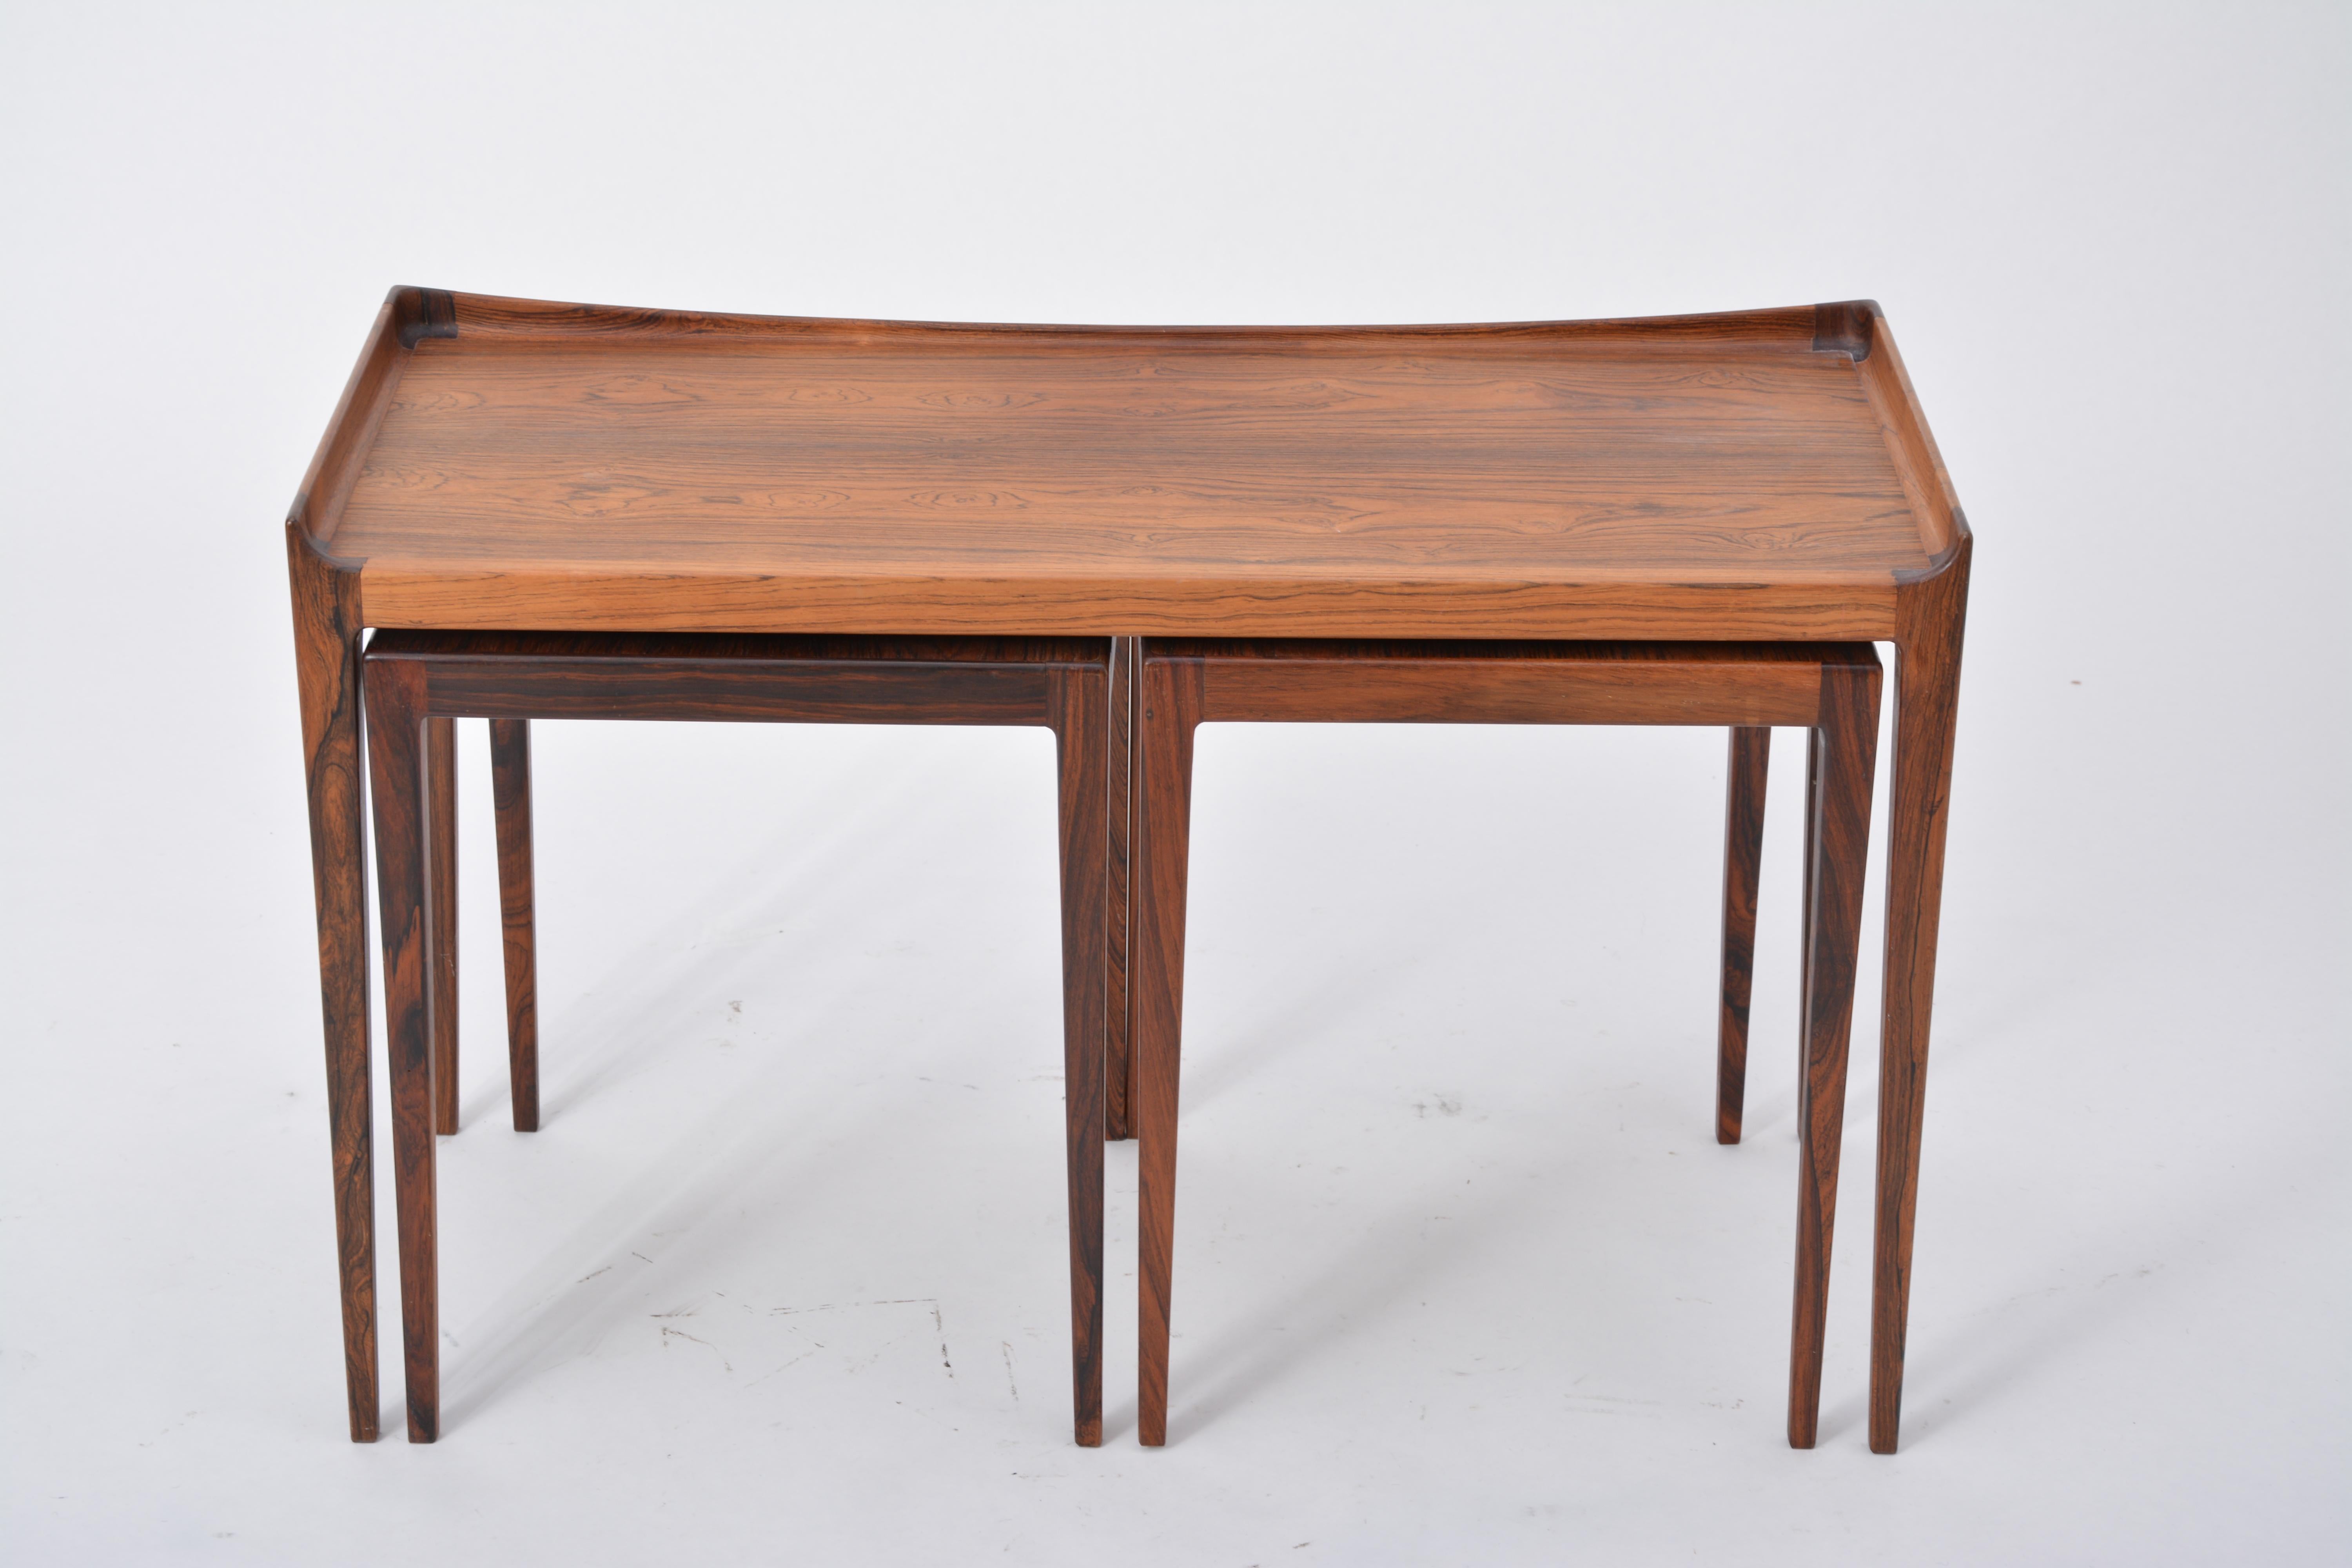 Set of three nesting tables made of rosewood, designed by Kurt Ostervig in 1958, produced by Jason mobler in Denmark. The set consists of one rectangular table (length 79.5 cm x depth 35.5 cm, height 50 cm) and two square tables (L 35.5 cm x W 35.5